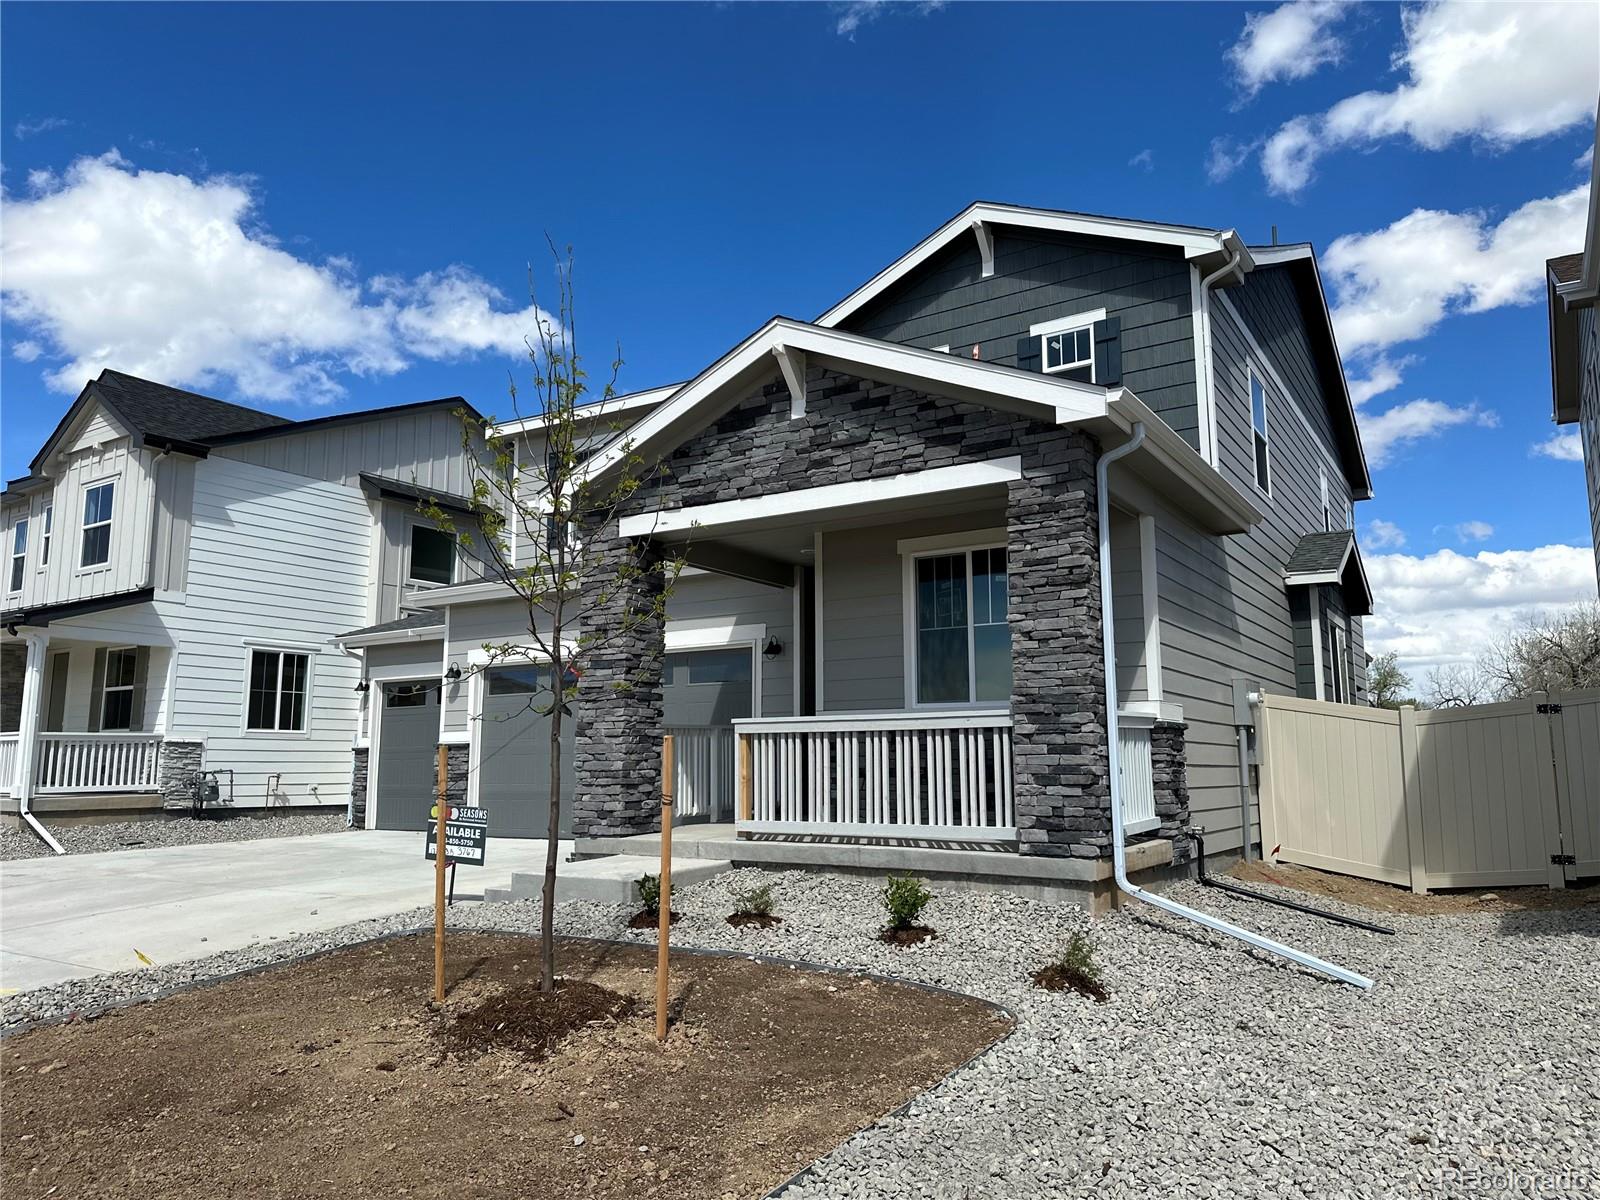 Report Image for 3767  Candlewood Drive,Johnstown, Colorado